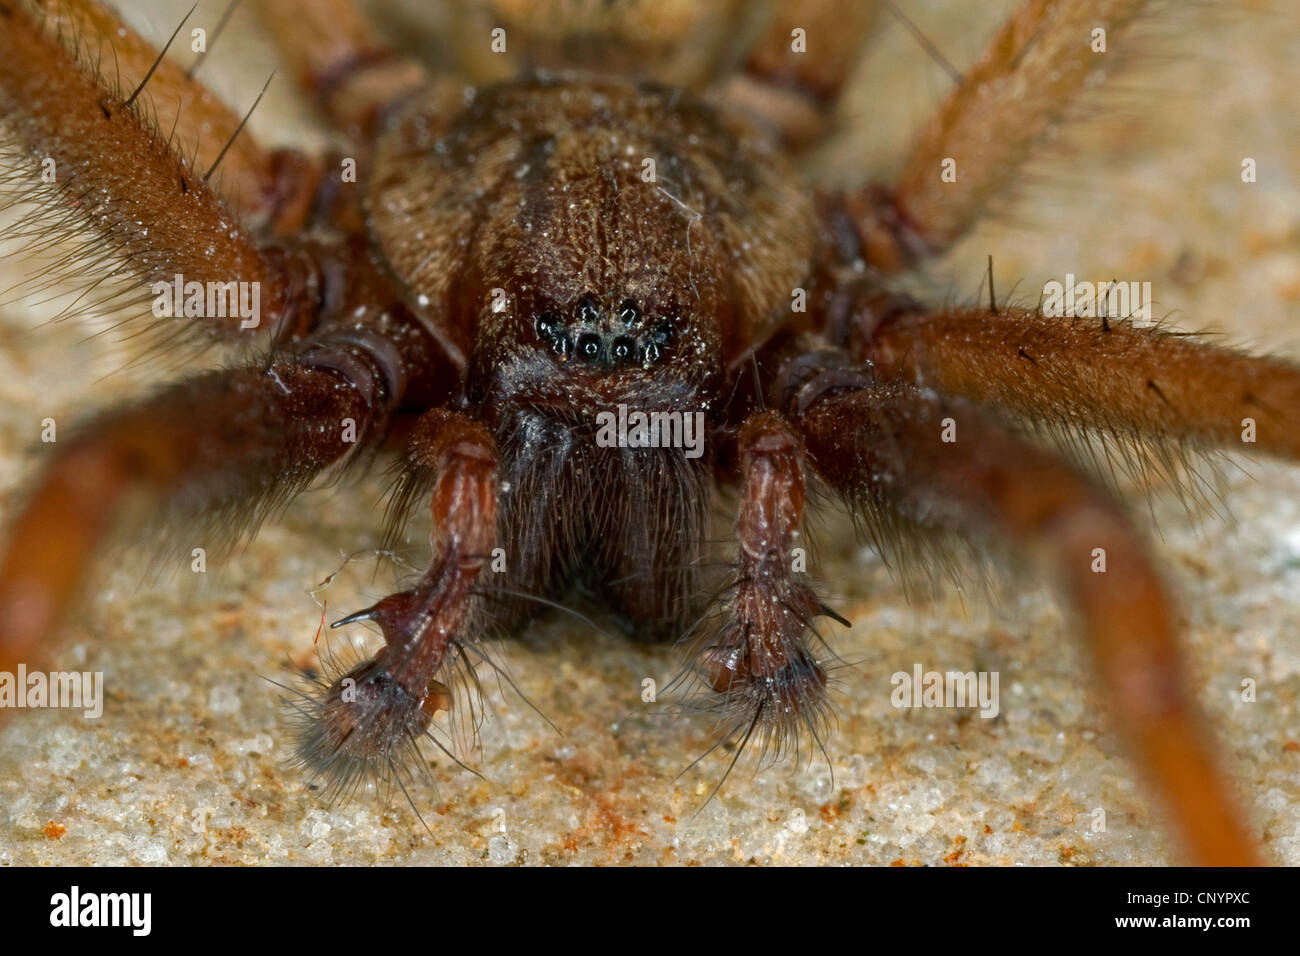 giant European house spider, giant house spider, larger house spider, cobweb spider (Tegenaria gigantea, Tegenaria atrica), male with 8 eyes, chelicerae and pedipalps, Germany Stock Photo